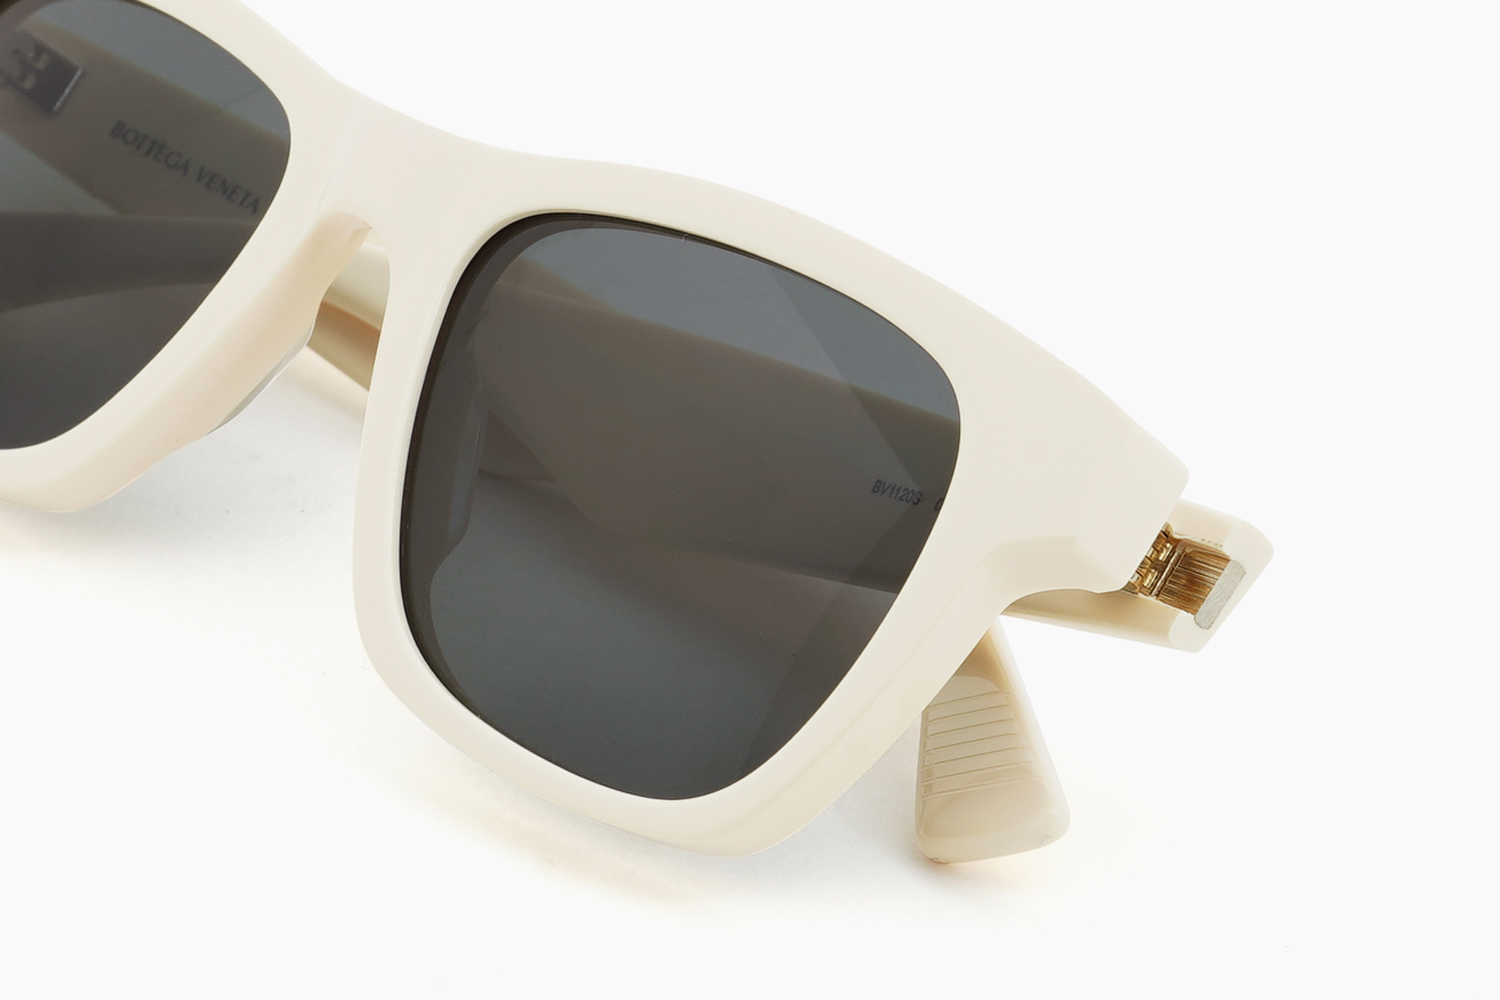 BV1120S - 003｜＊SUNGLASSES COLLECTION - 2022 SPRING & SUMMER